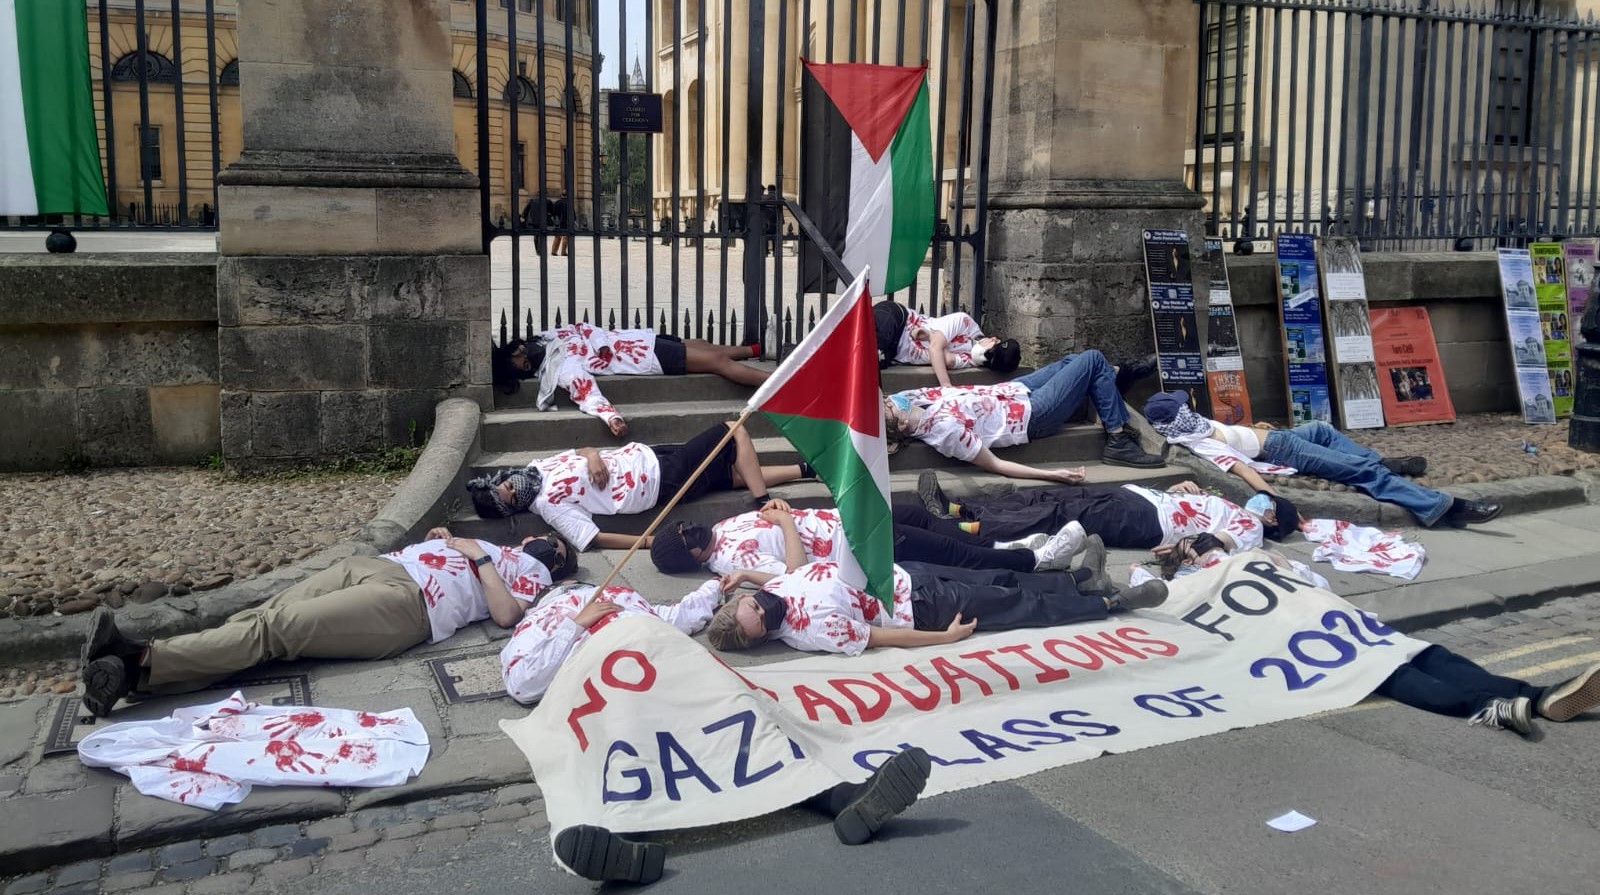 Image shows die-in outside entrance to Sheldonian Theatre.